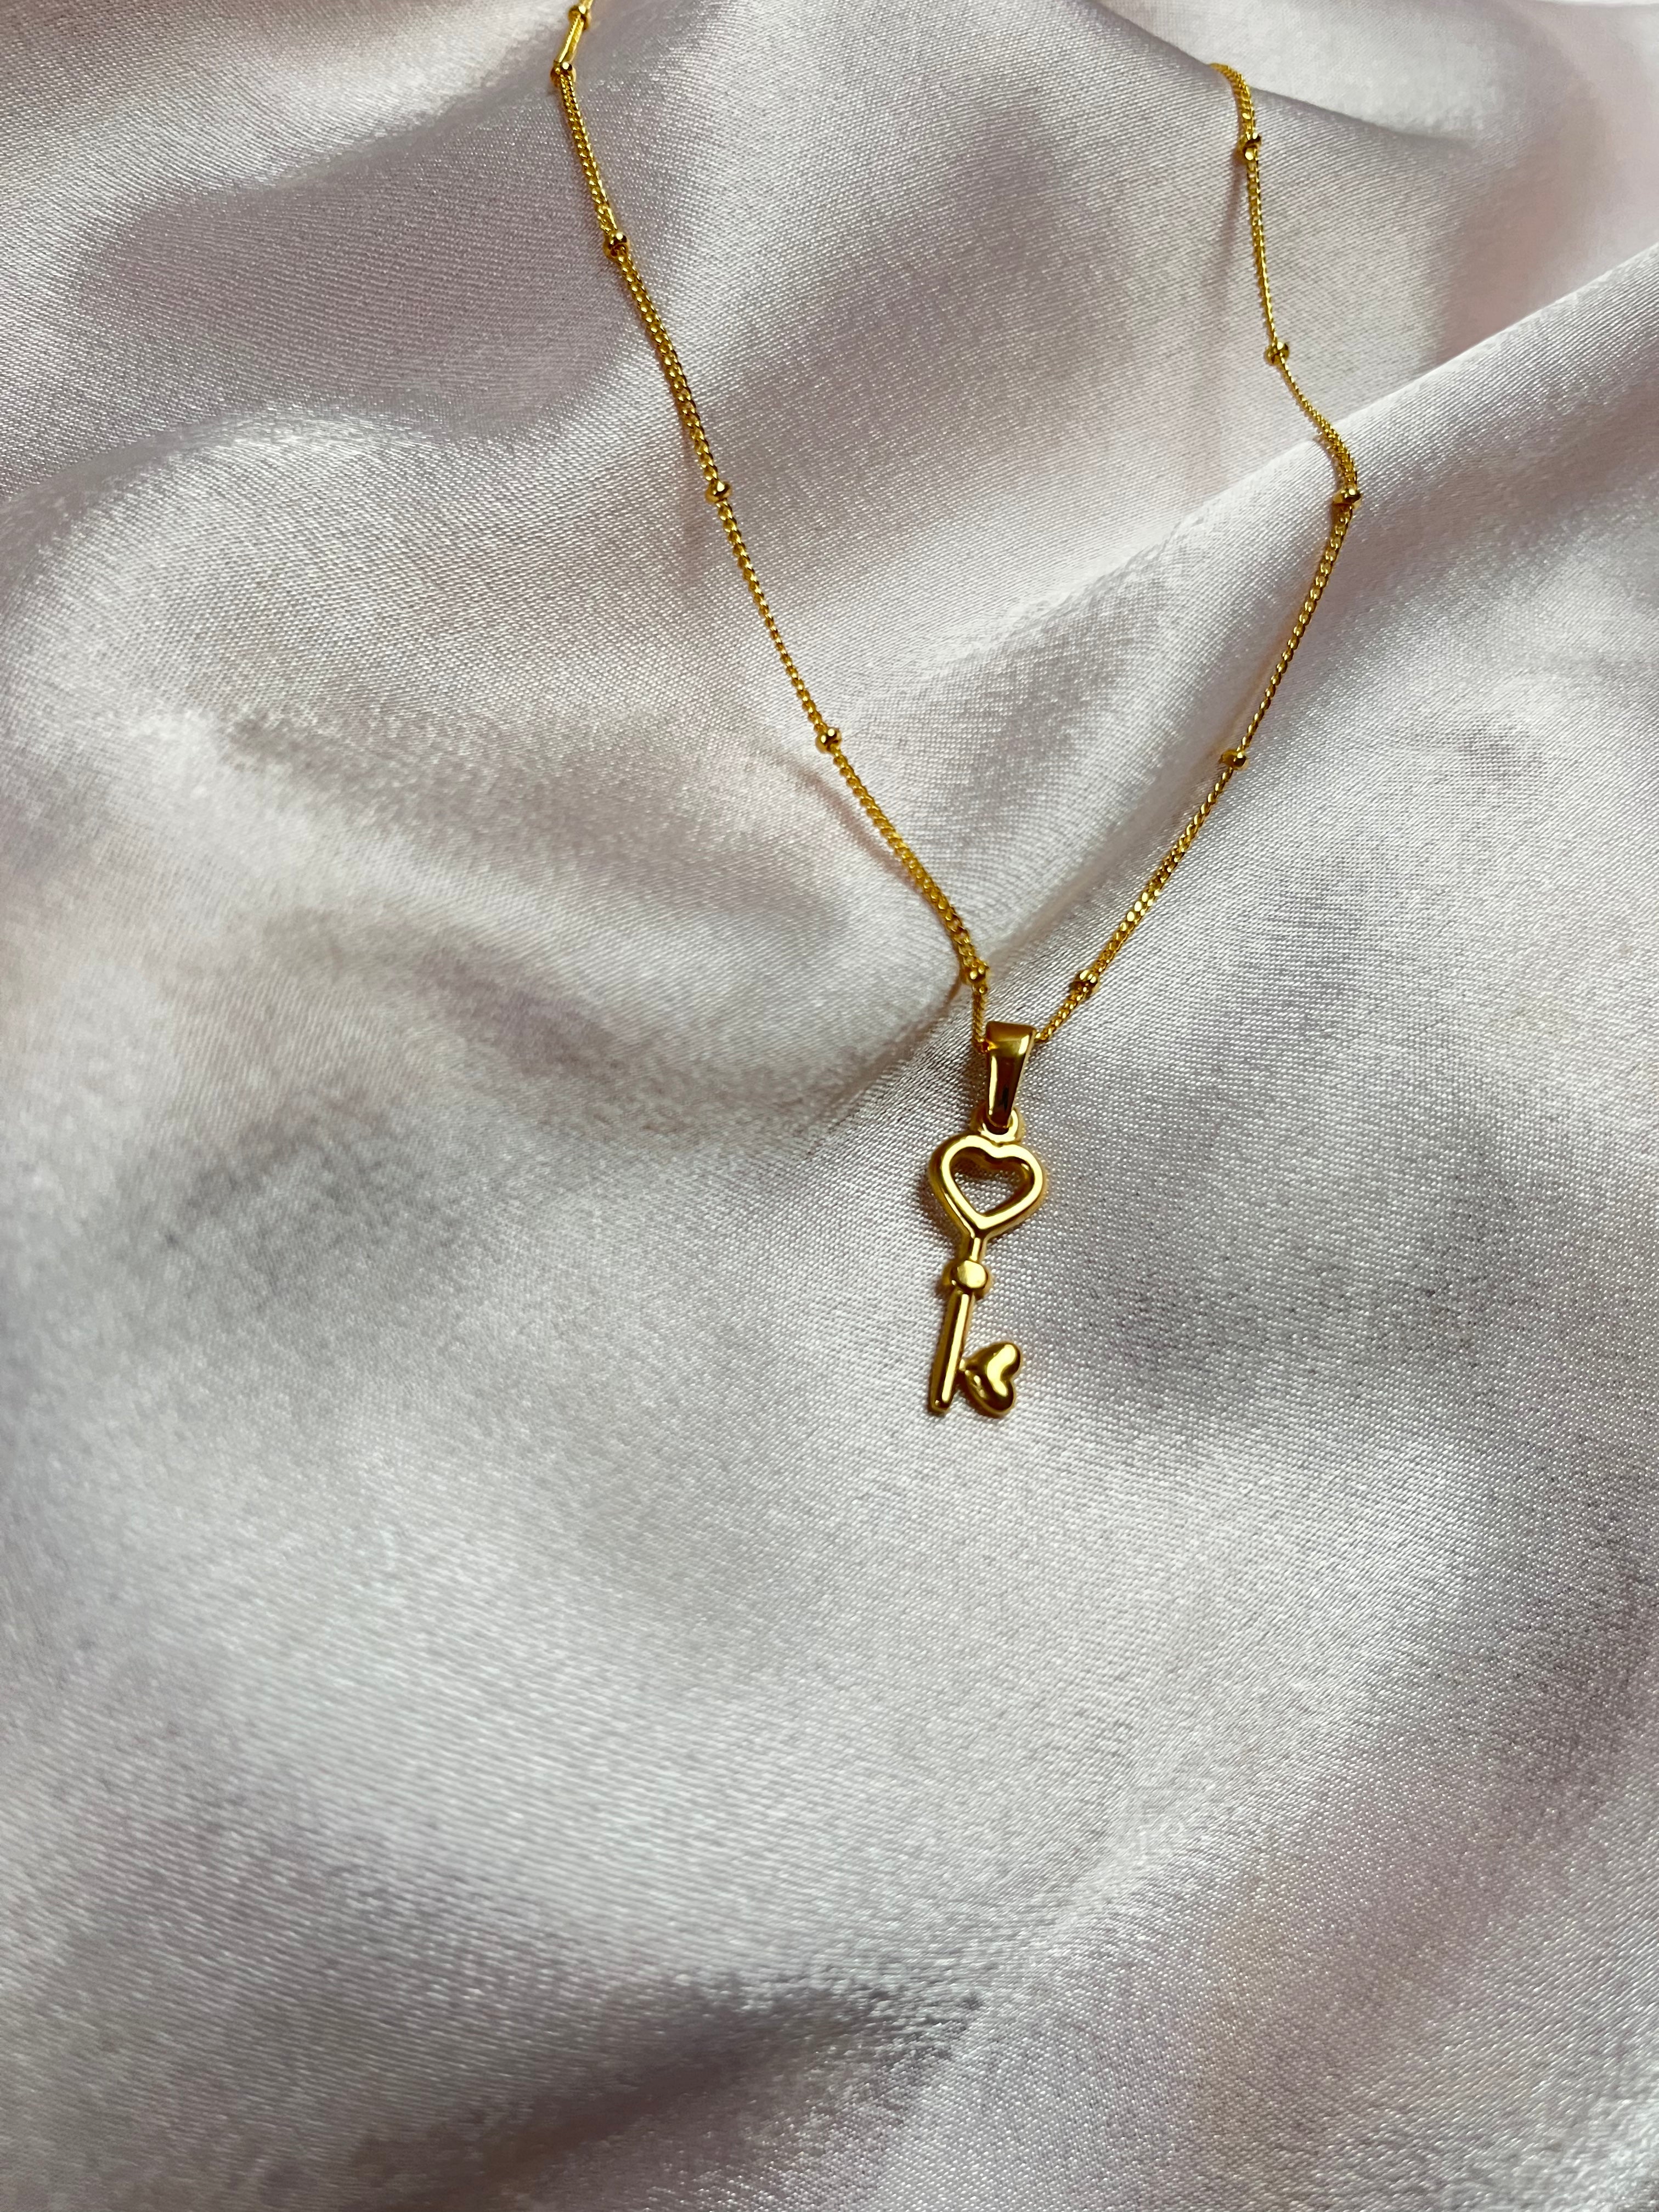 Small key necklace